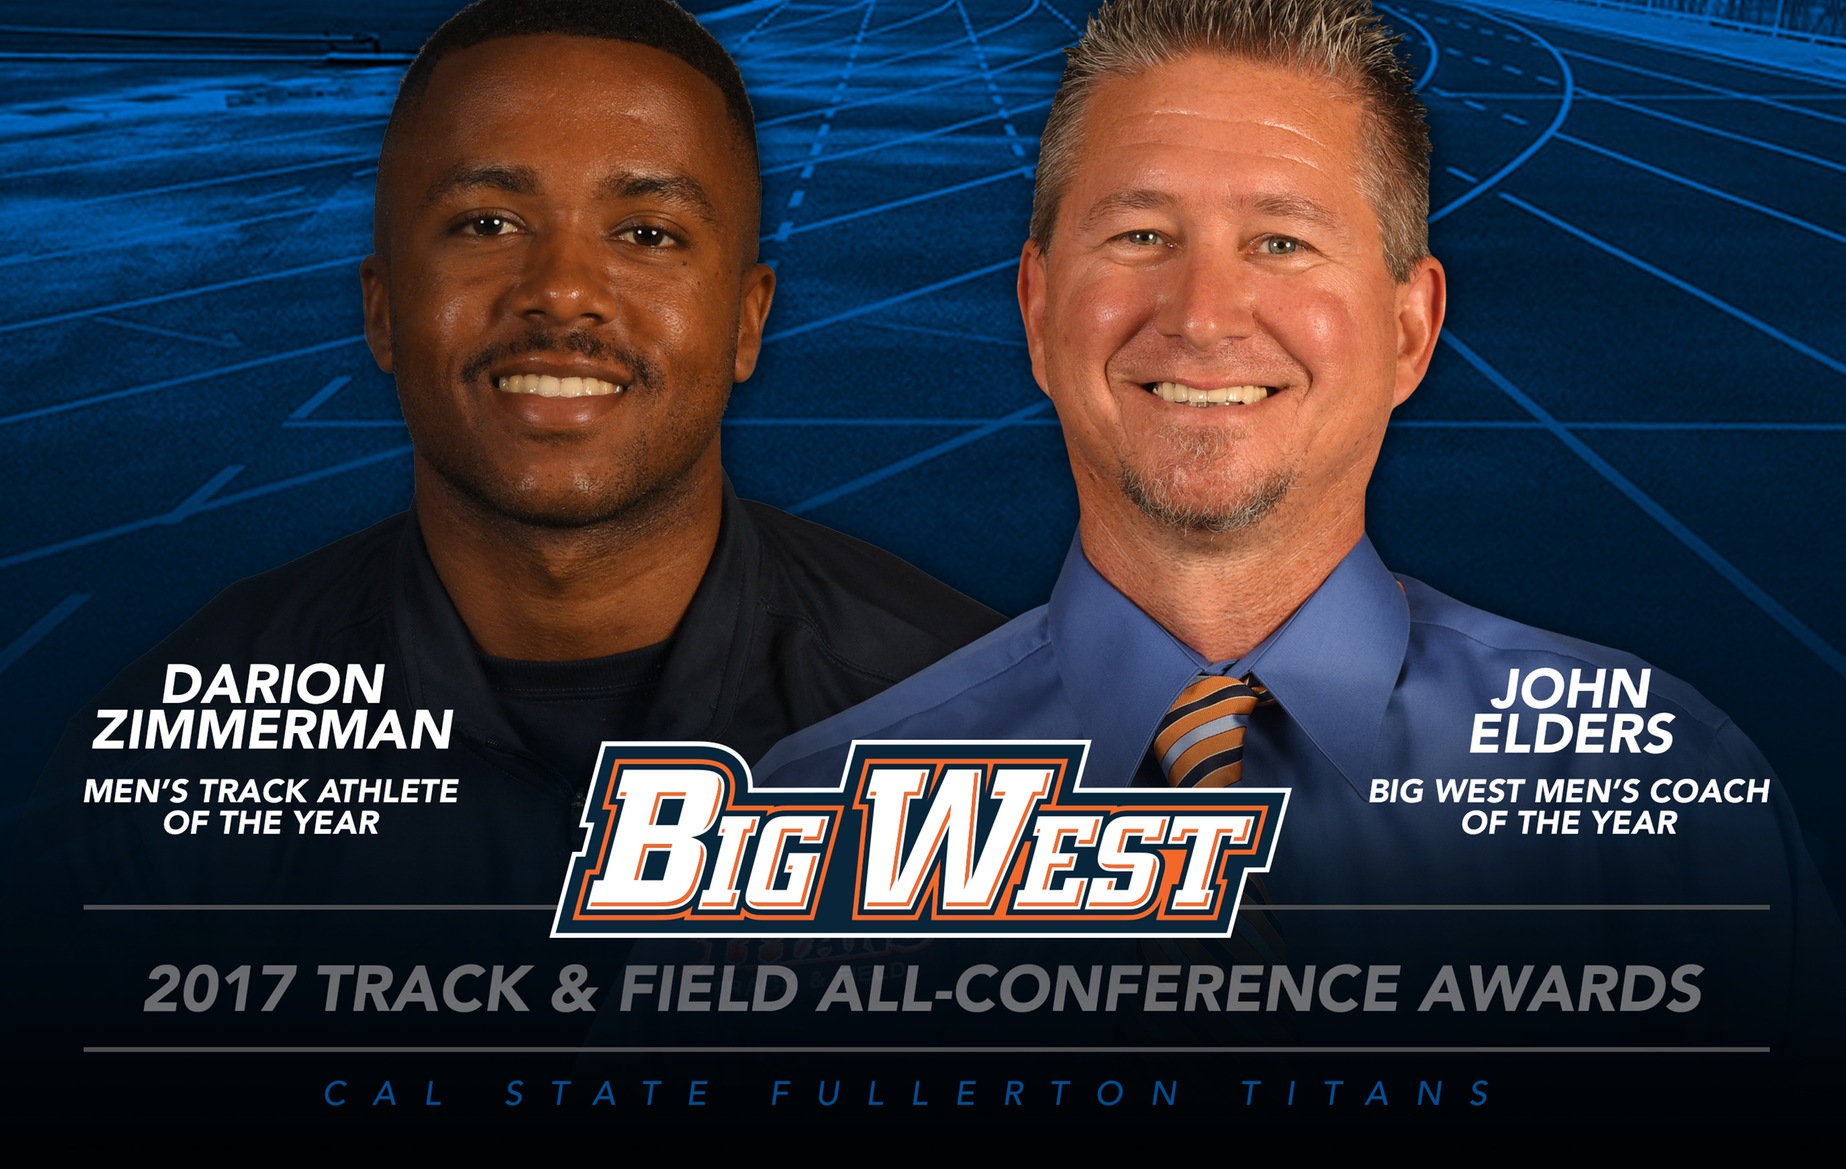 Elders Named Men's Coach of the Year; Zimmerman Athlete of the Year